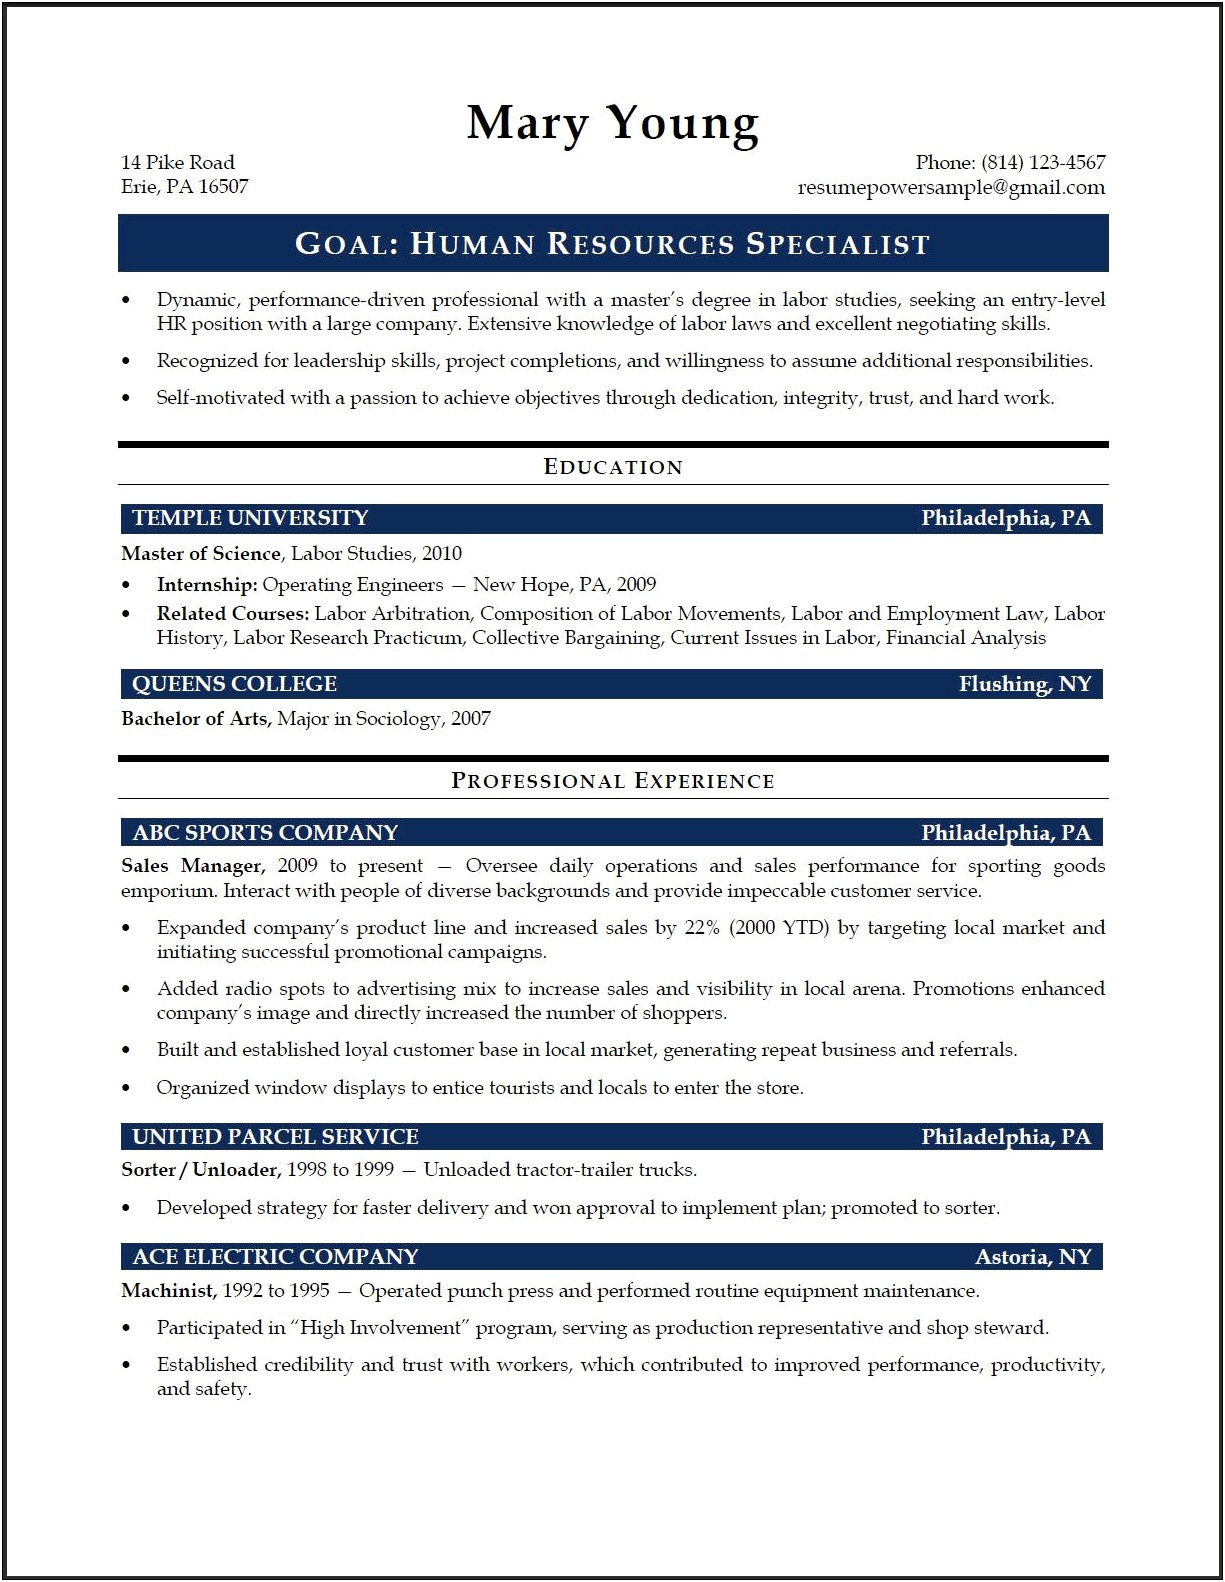 Examples Of Objectives For Resumes In Human Services